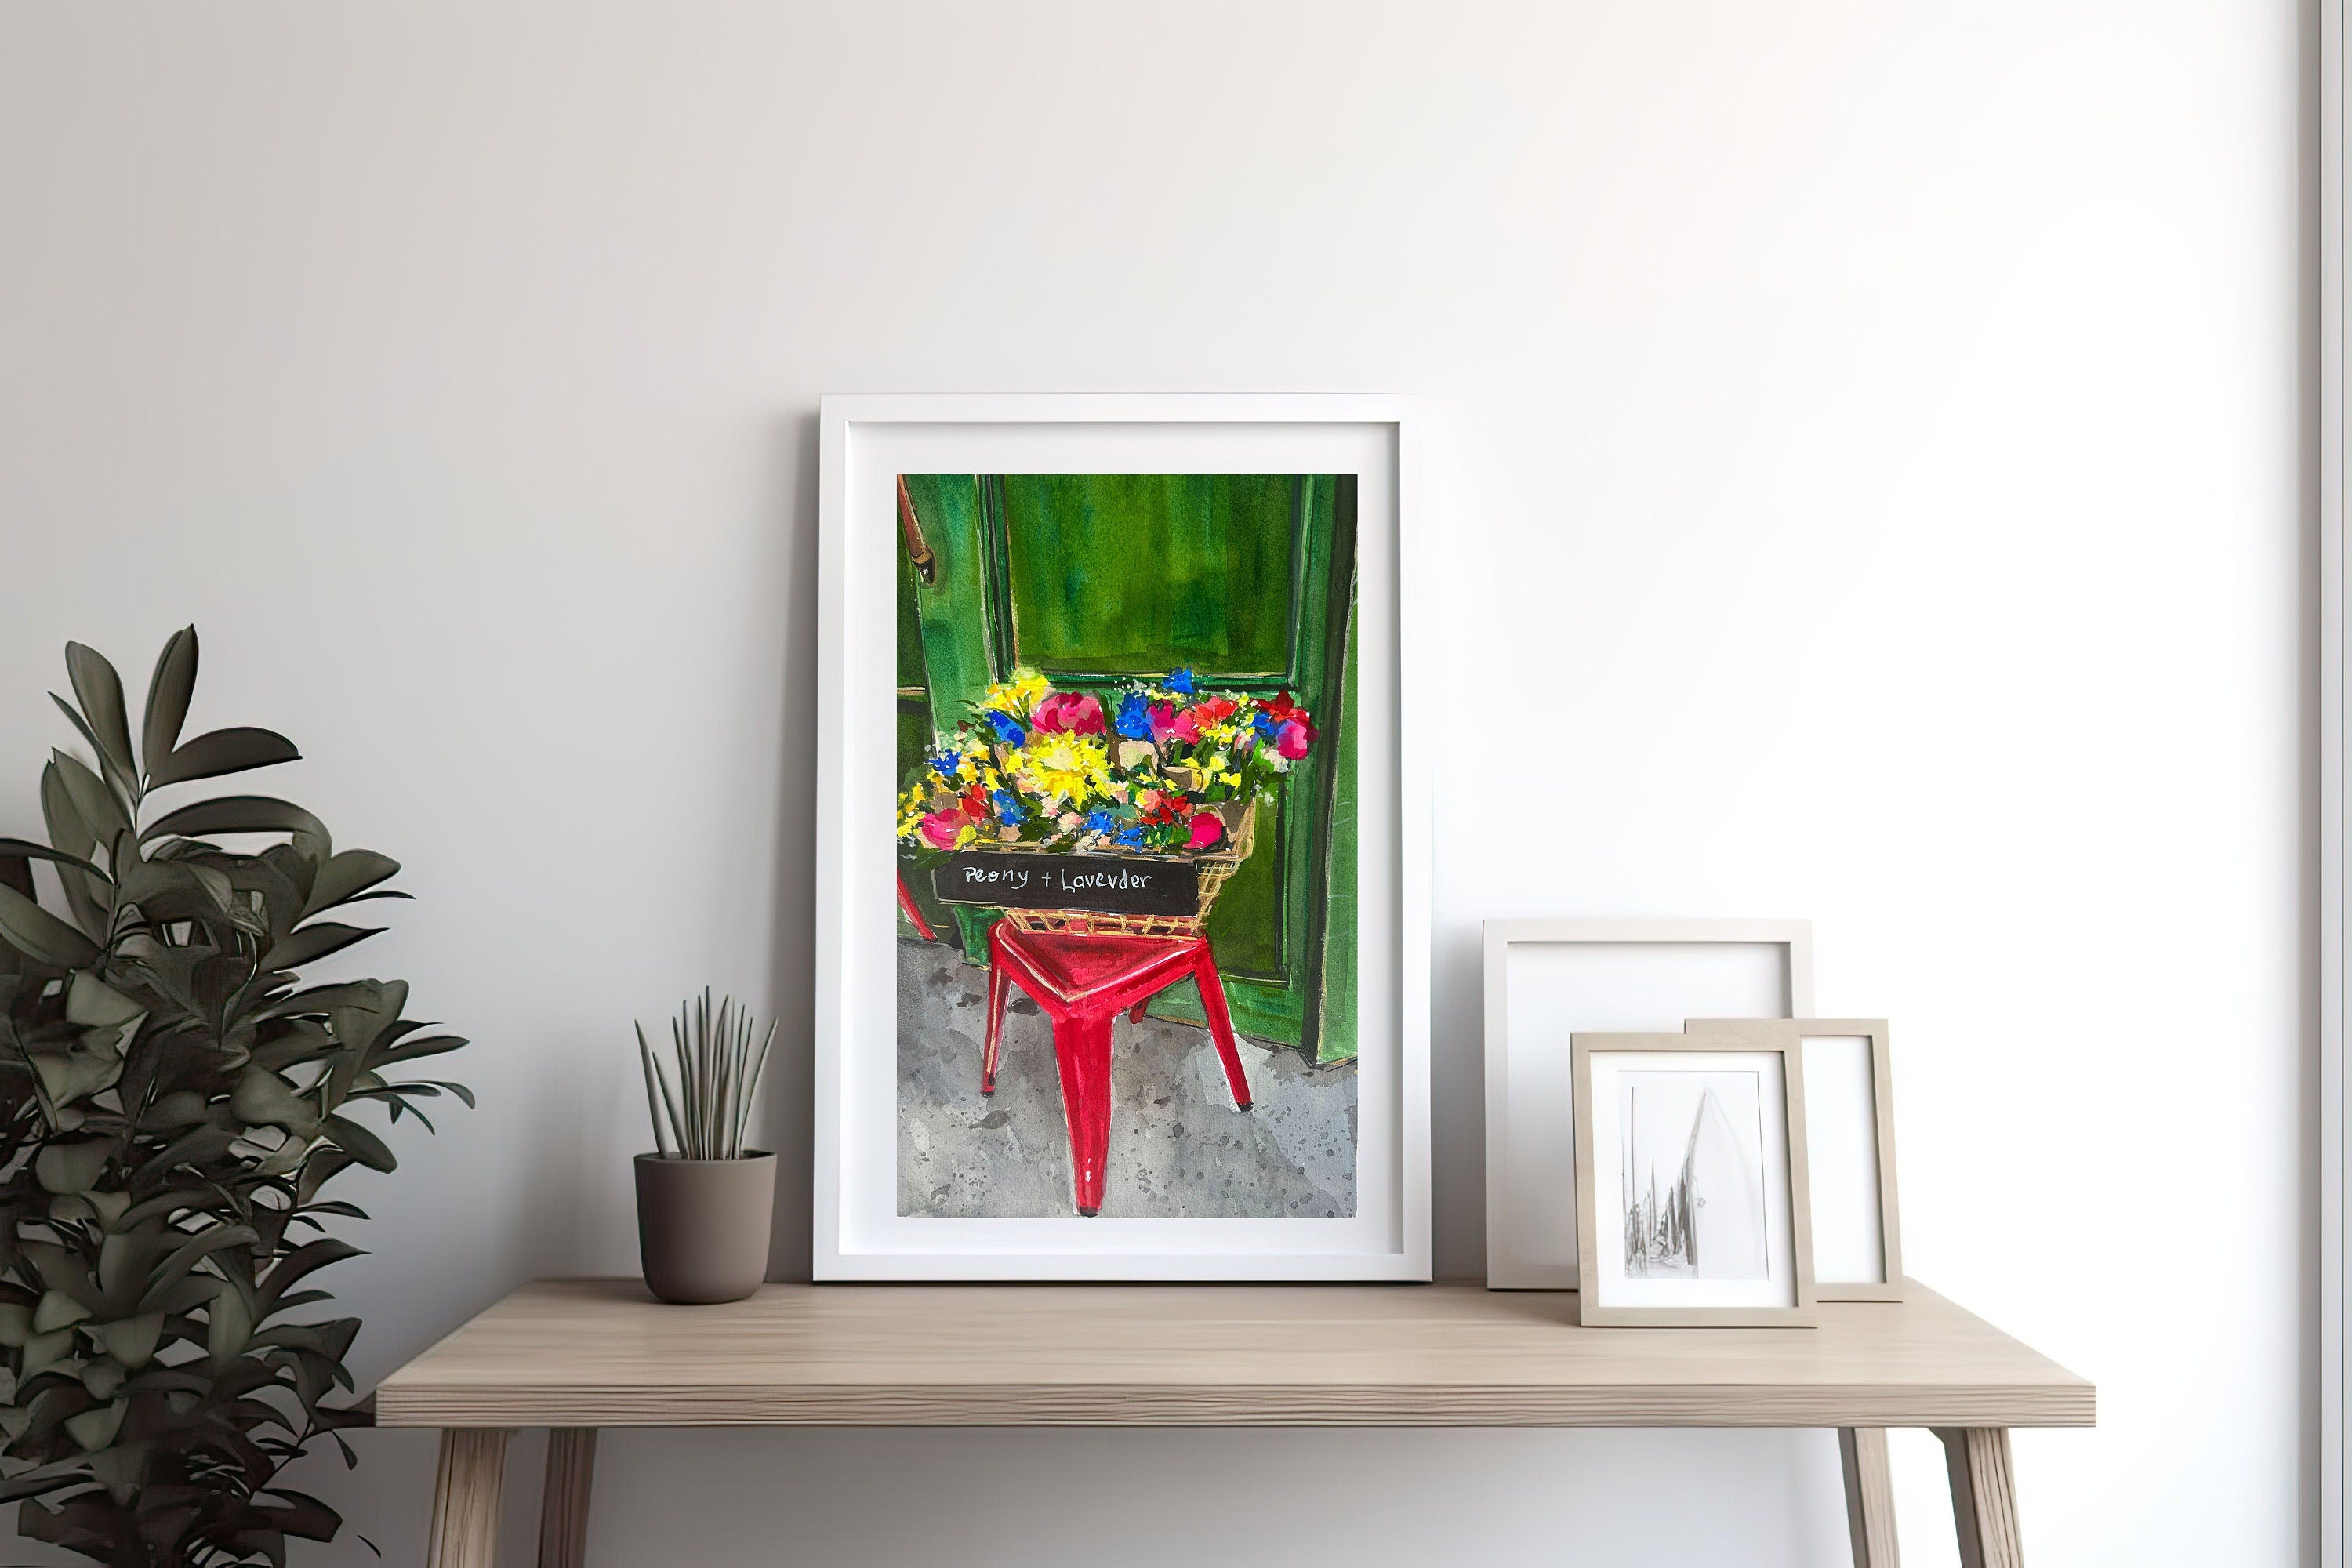 Flower market print of painting by Medjool Studio. Print of a watercolour painting of a basket of flowers on a small red stool on a side street in France.